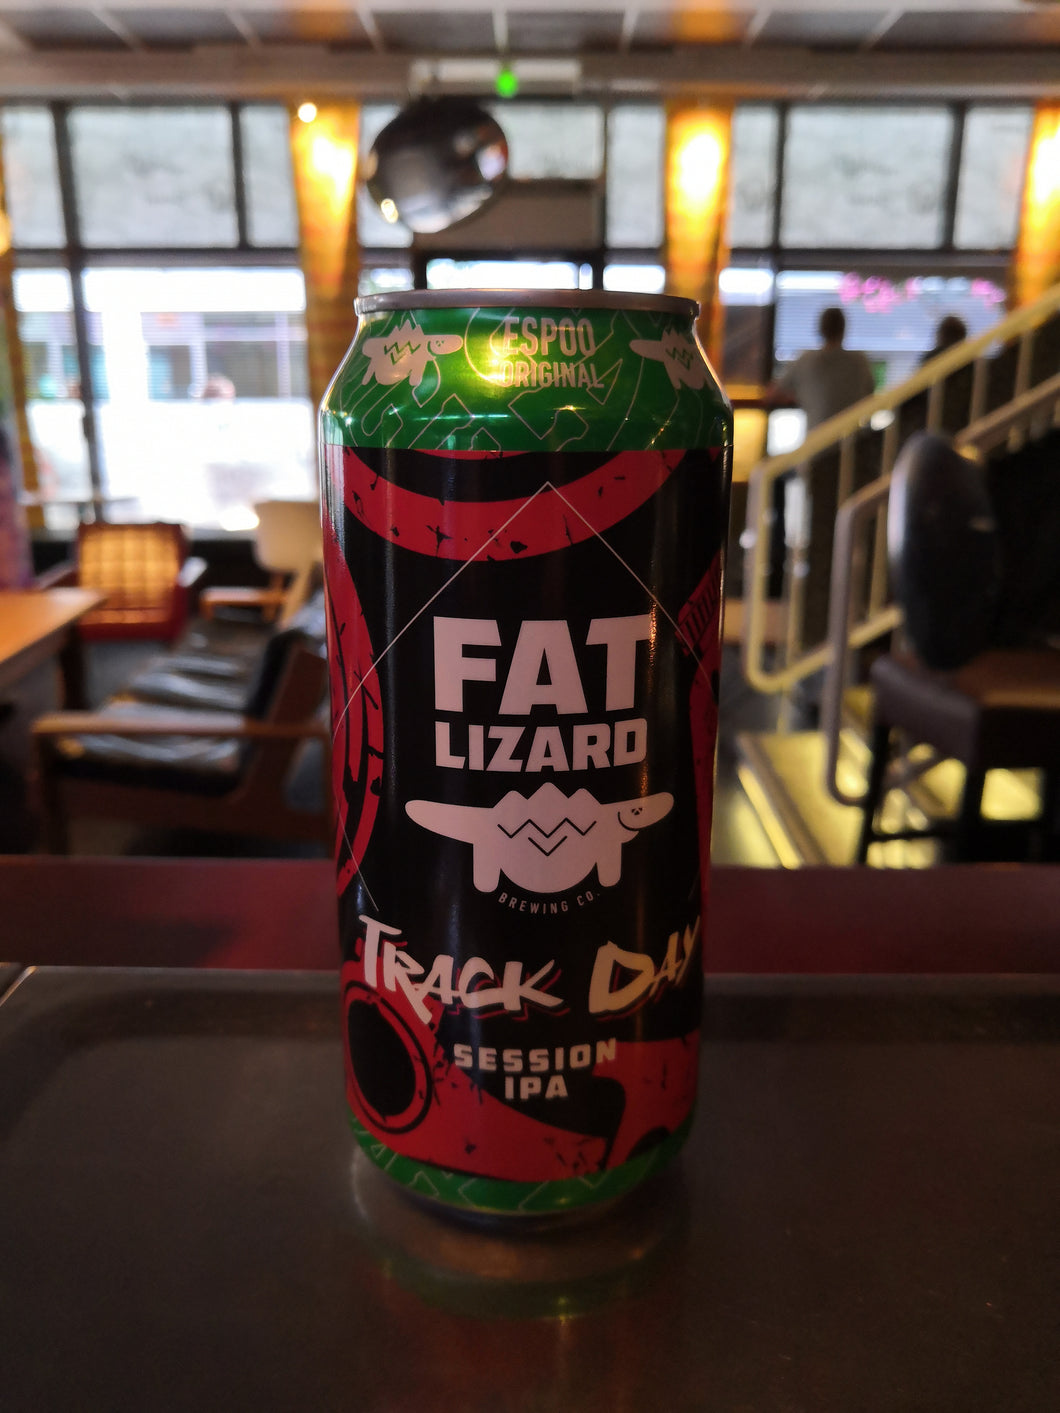 Fat Lizard Track Day Session IPA